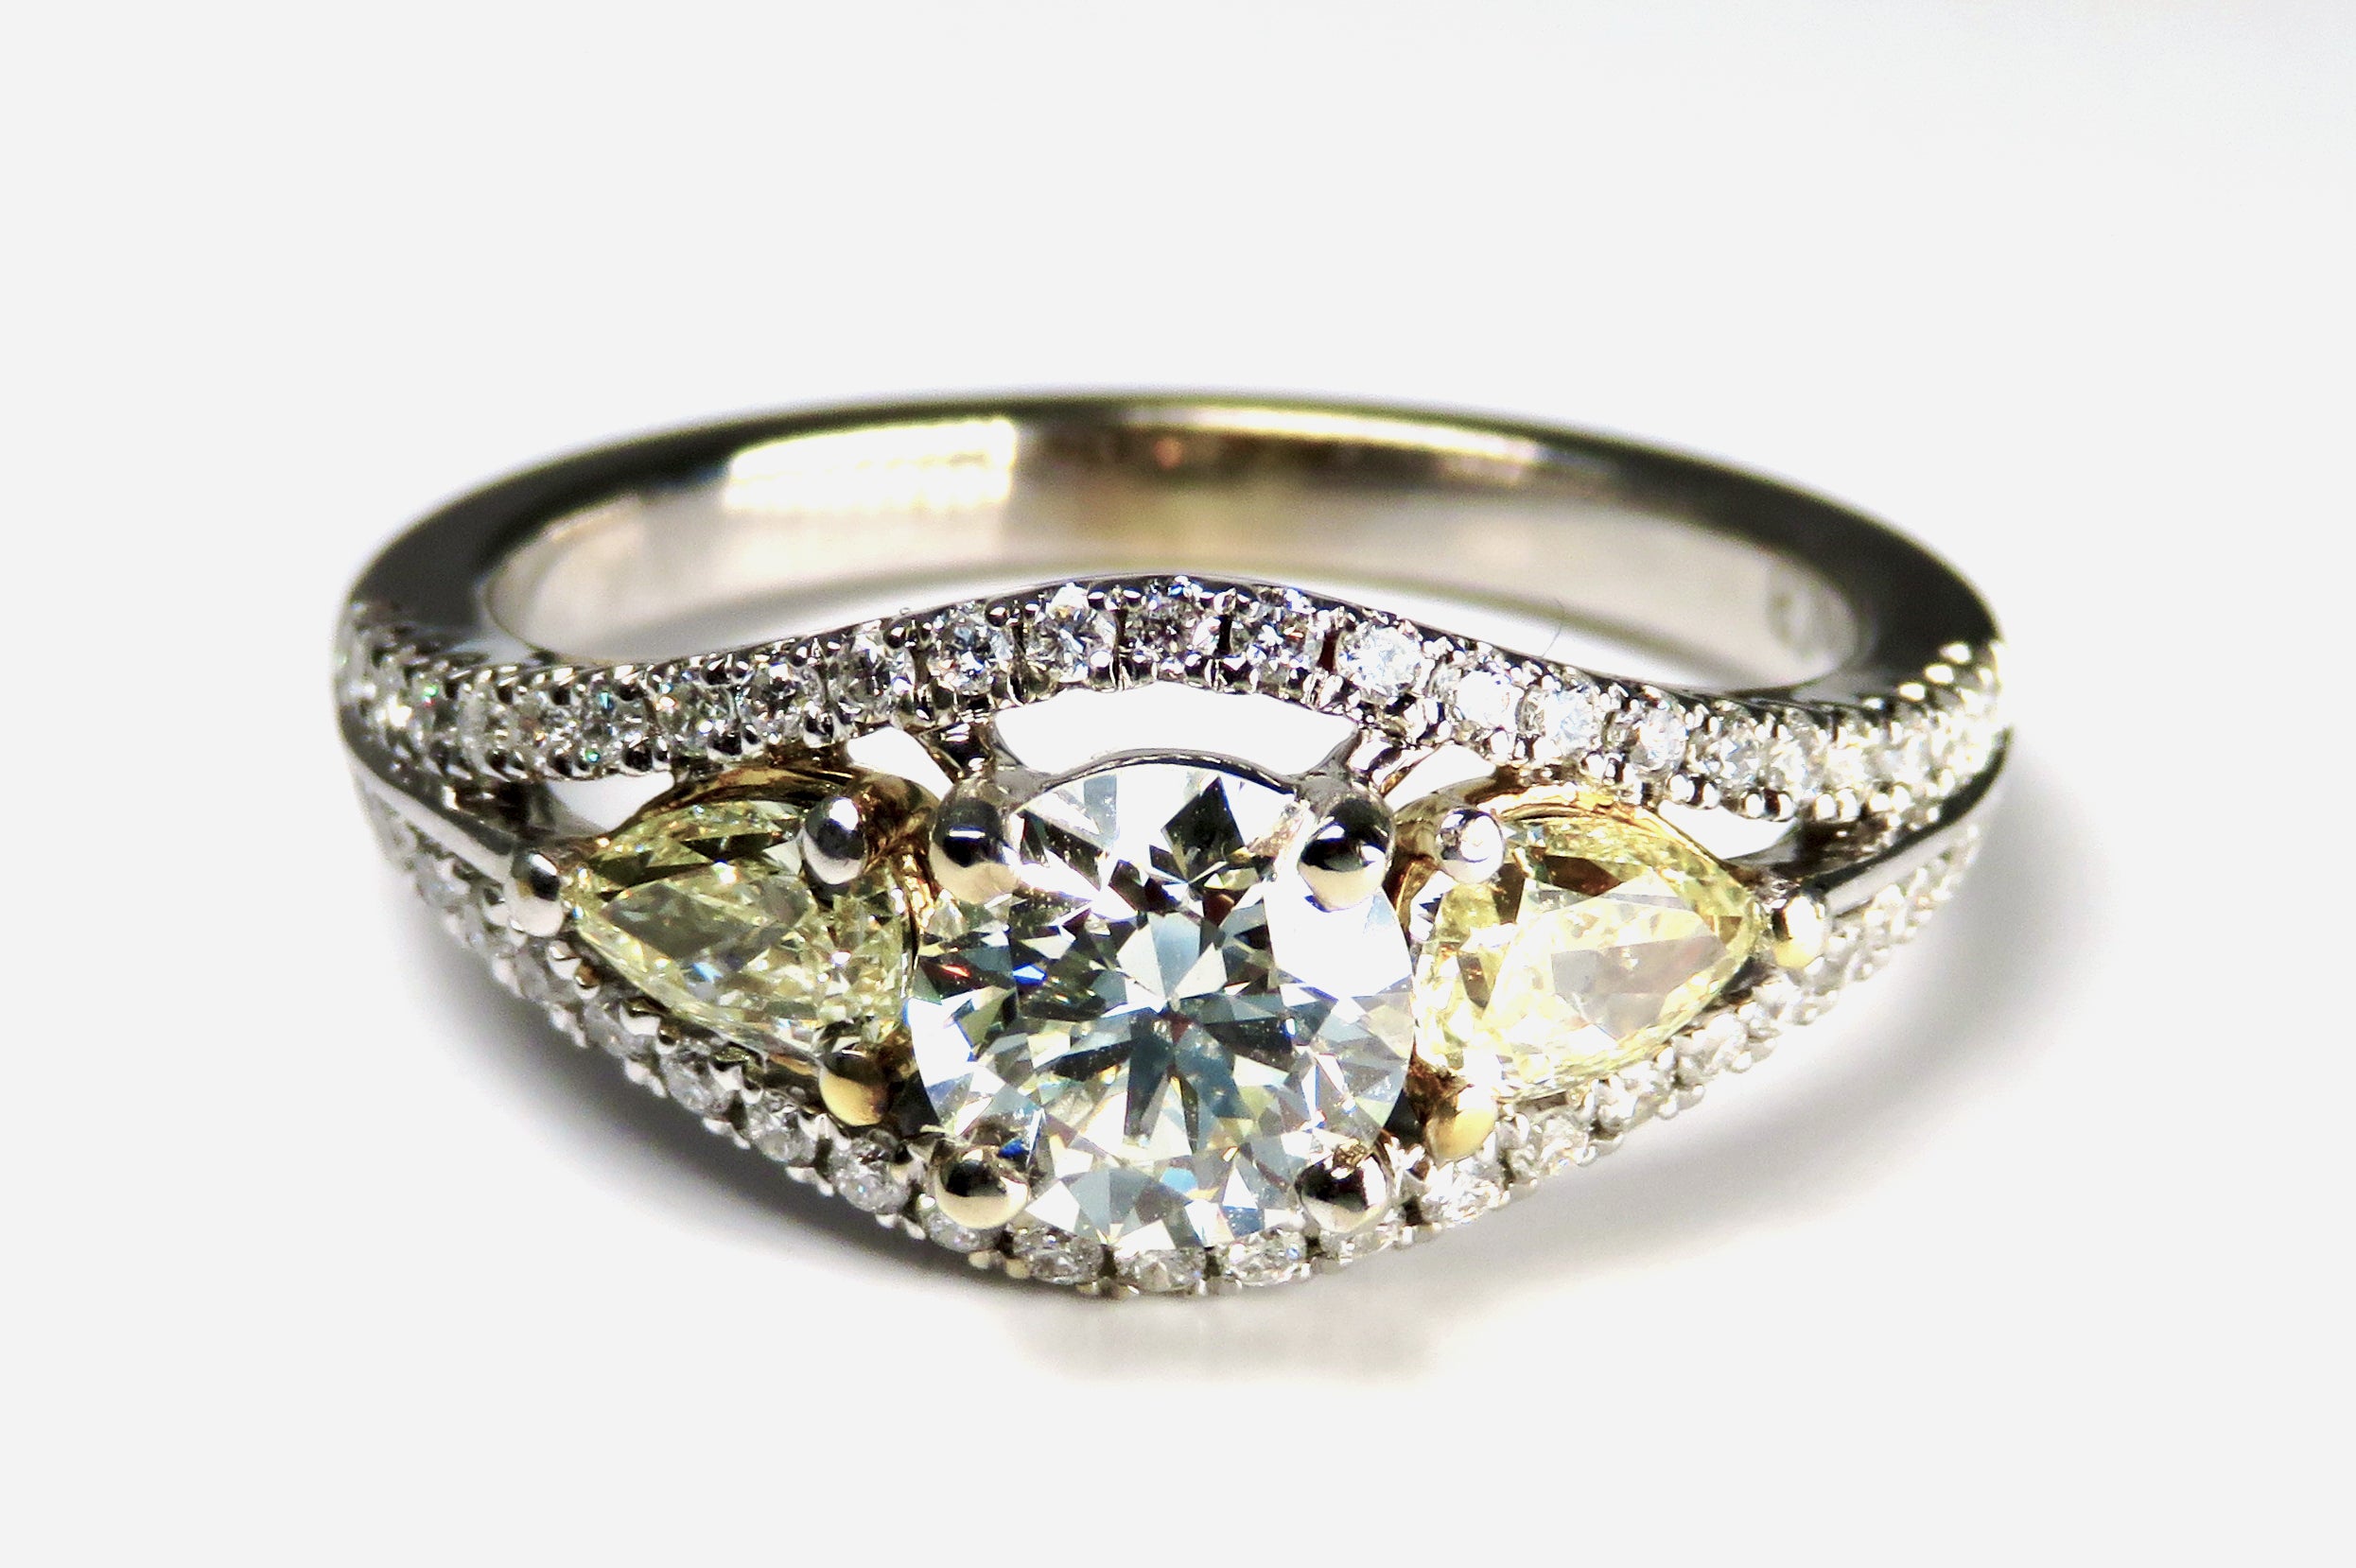 18kt White Gold Round Brilliant Cut Diamond Engagement Ring with Yellow Side Diamonds